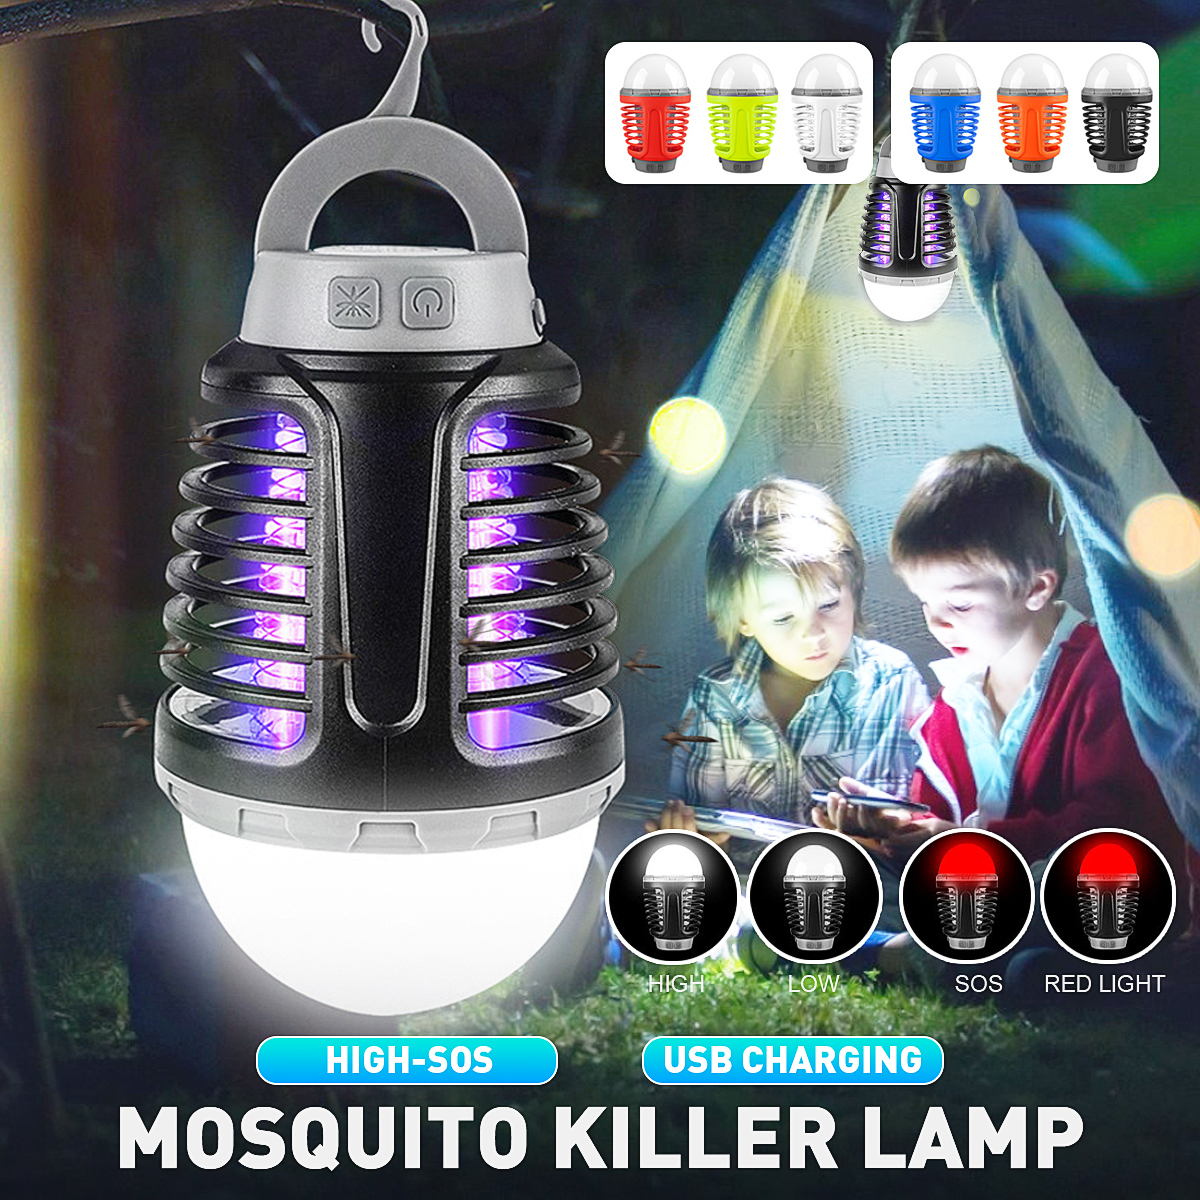 70-Lumens-2-in-1-LED-Zapper-Light-Bulbs-Mosquito-Killer-Lamp-4-Modes-USB-Rechargeable-Hook-Hanging-C-1727489-1